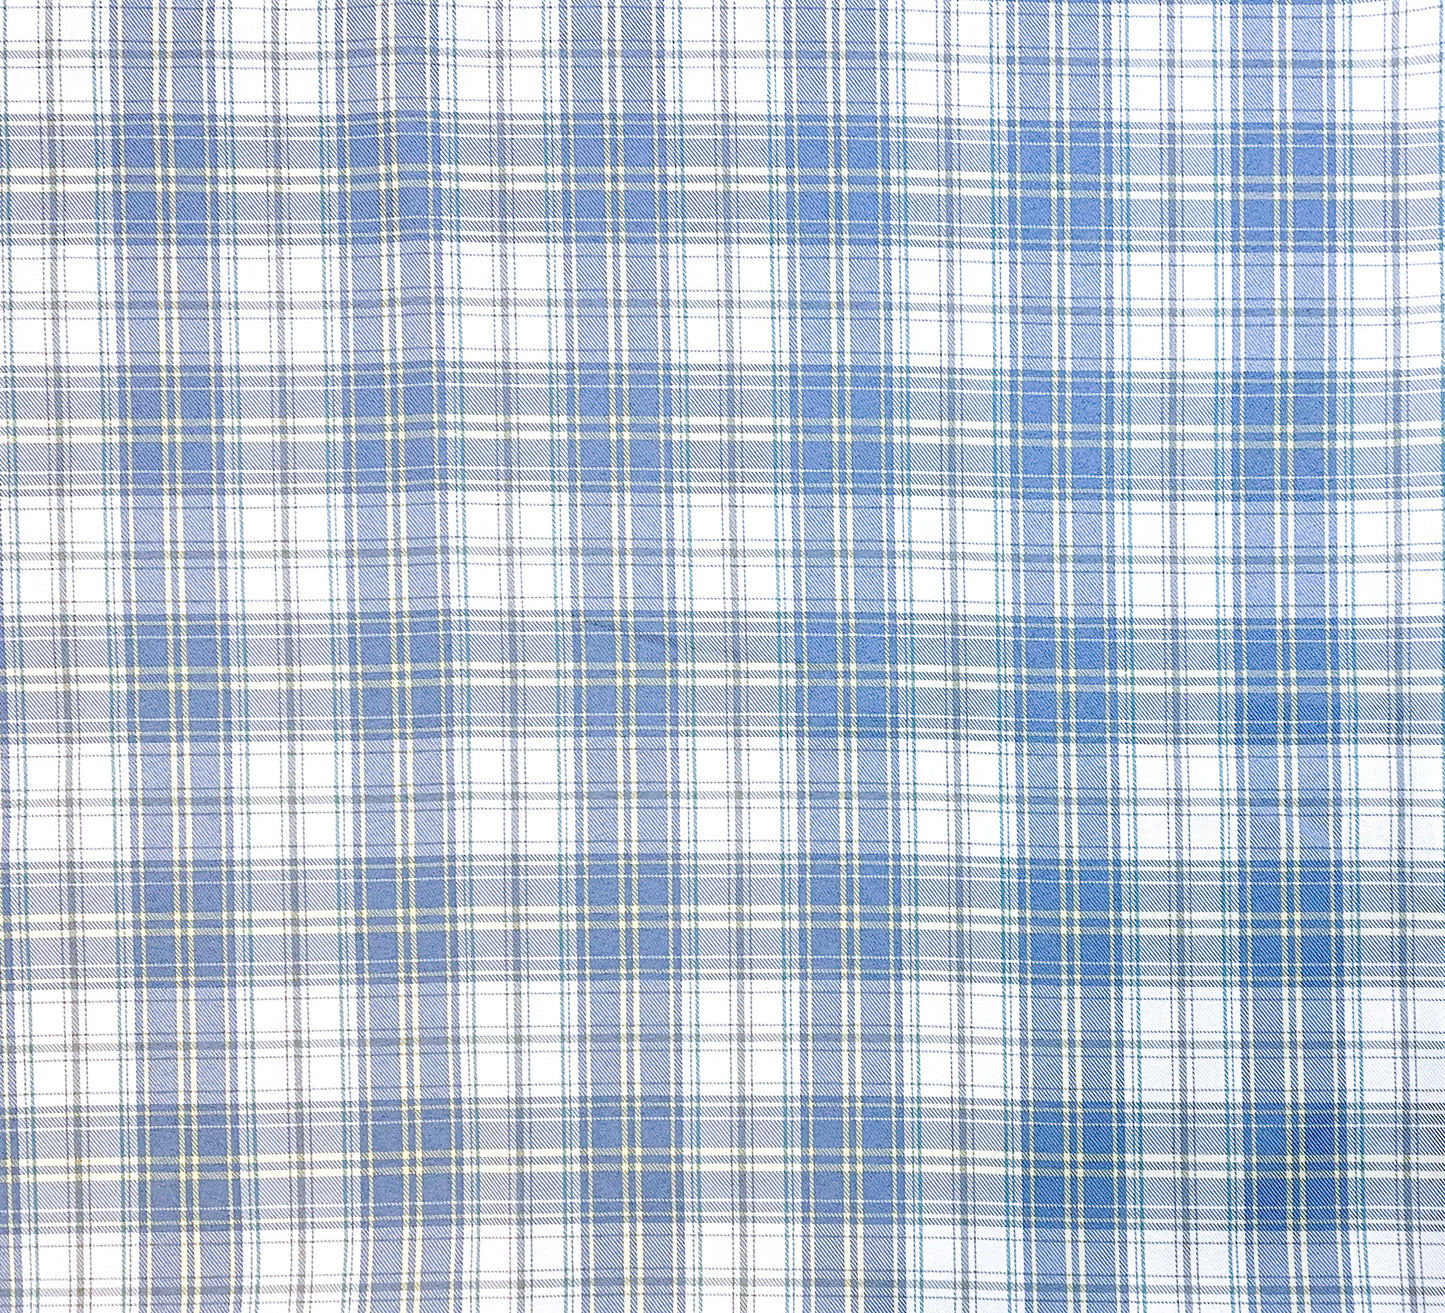 Plaid-light blue and grey with green